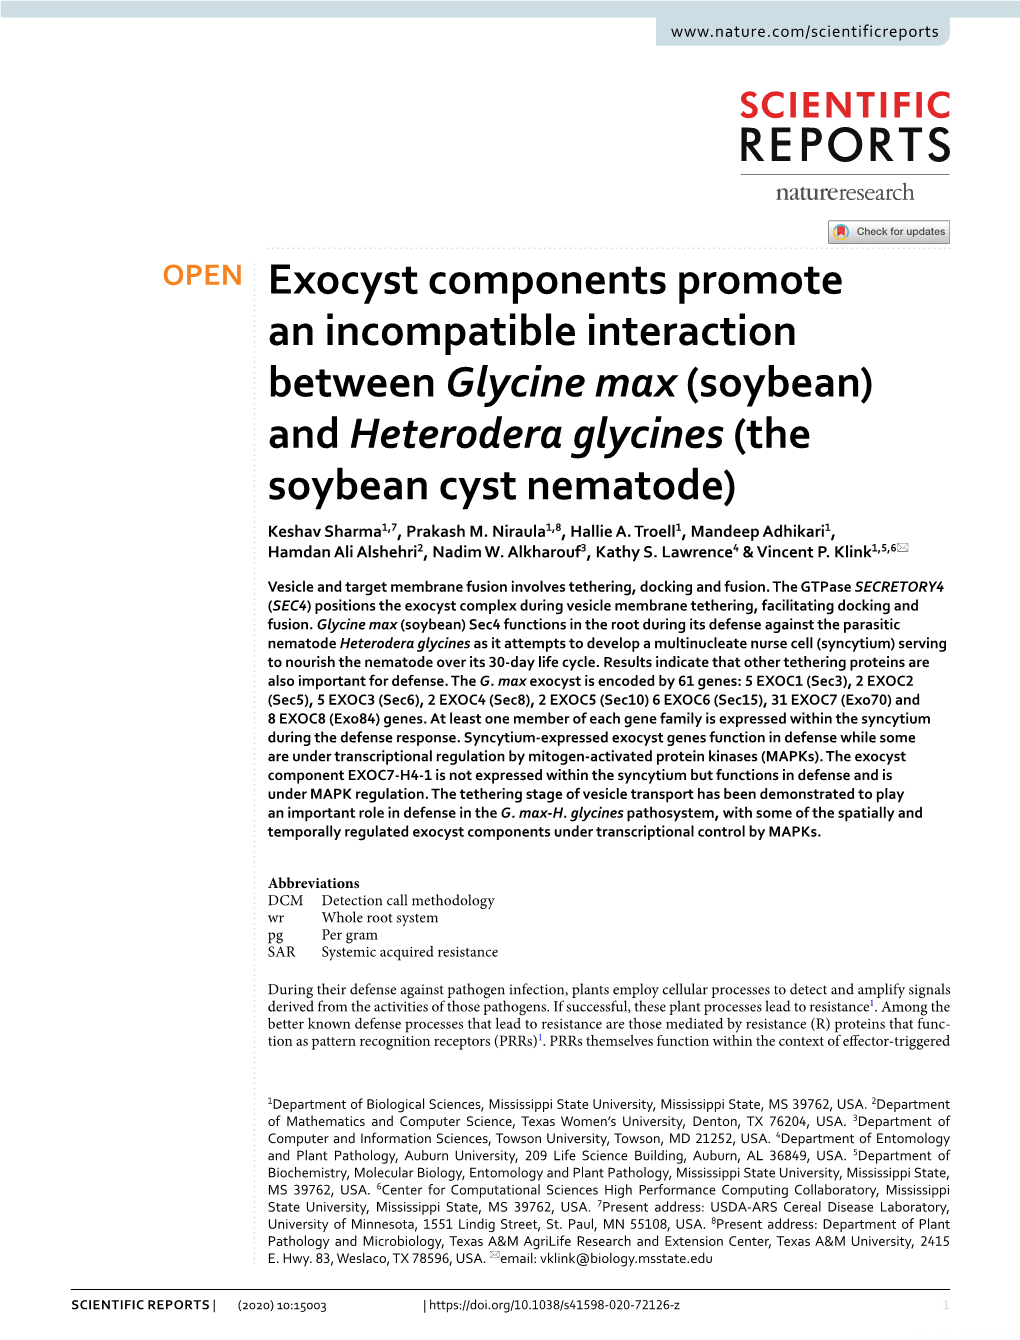 Exocyst Components Promote an Incompatible Interaction Between Glycine Max (Soybean) and Heterodera Glycines (The Soybean Cyst Nematode) Keshav Sharma1,7, Prakash M